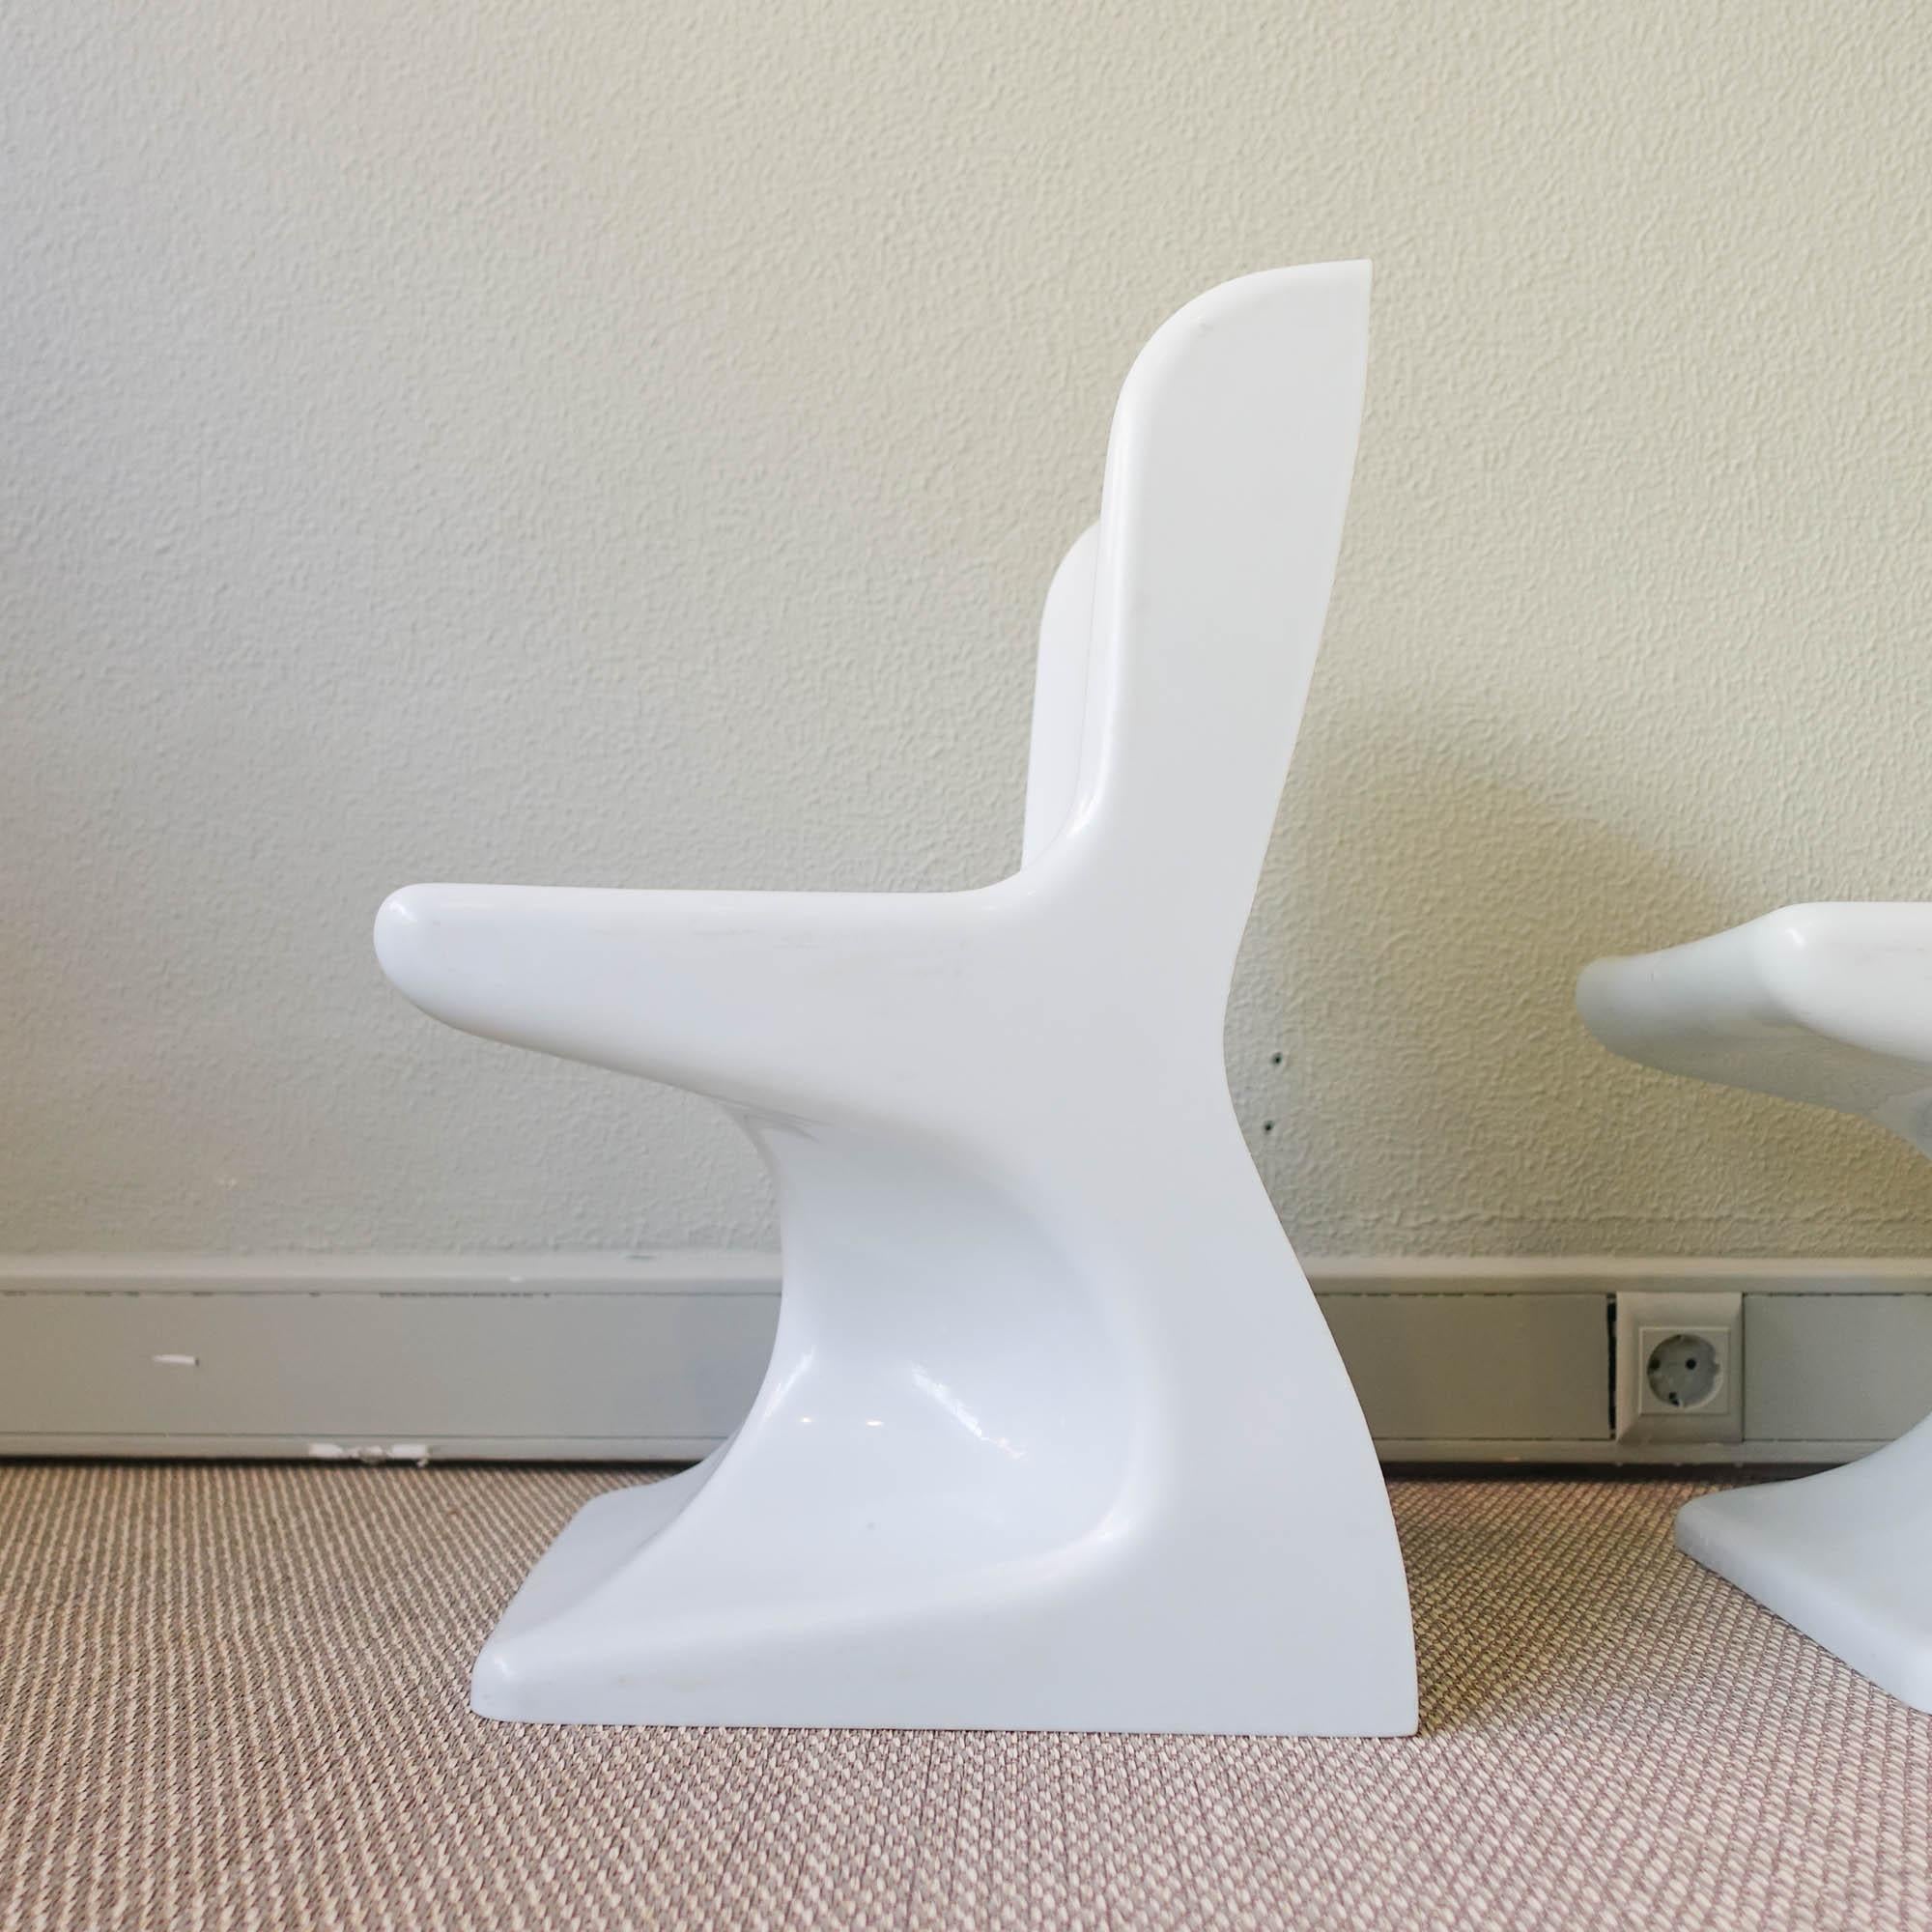 Plastic Pair of Children's Chairs by Patrick Gingembre for Selap, 1970's For Sale